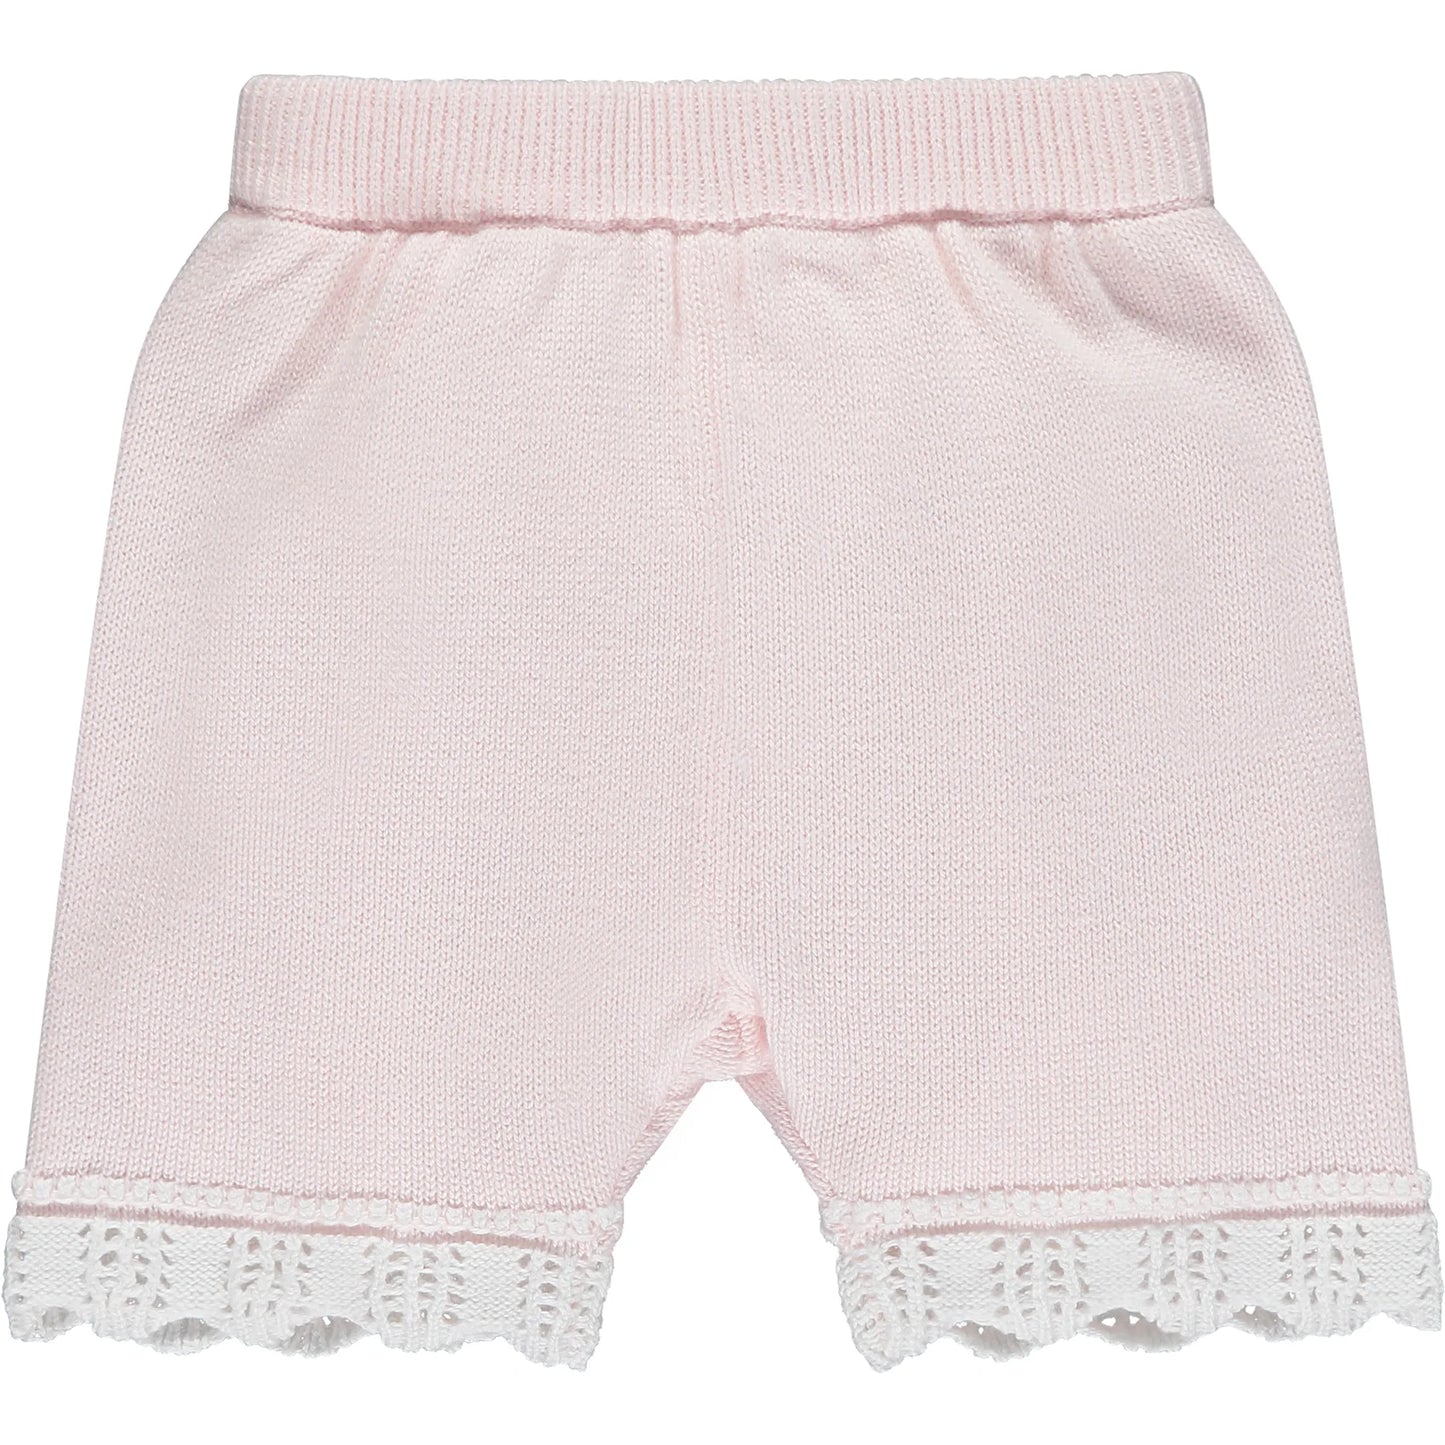 Emile et Rose Baby Girls Pale Pink Short Sleeve Knit Top & Short Outfit